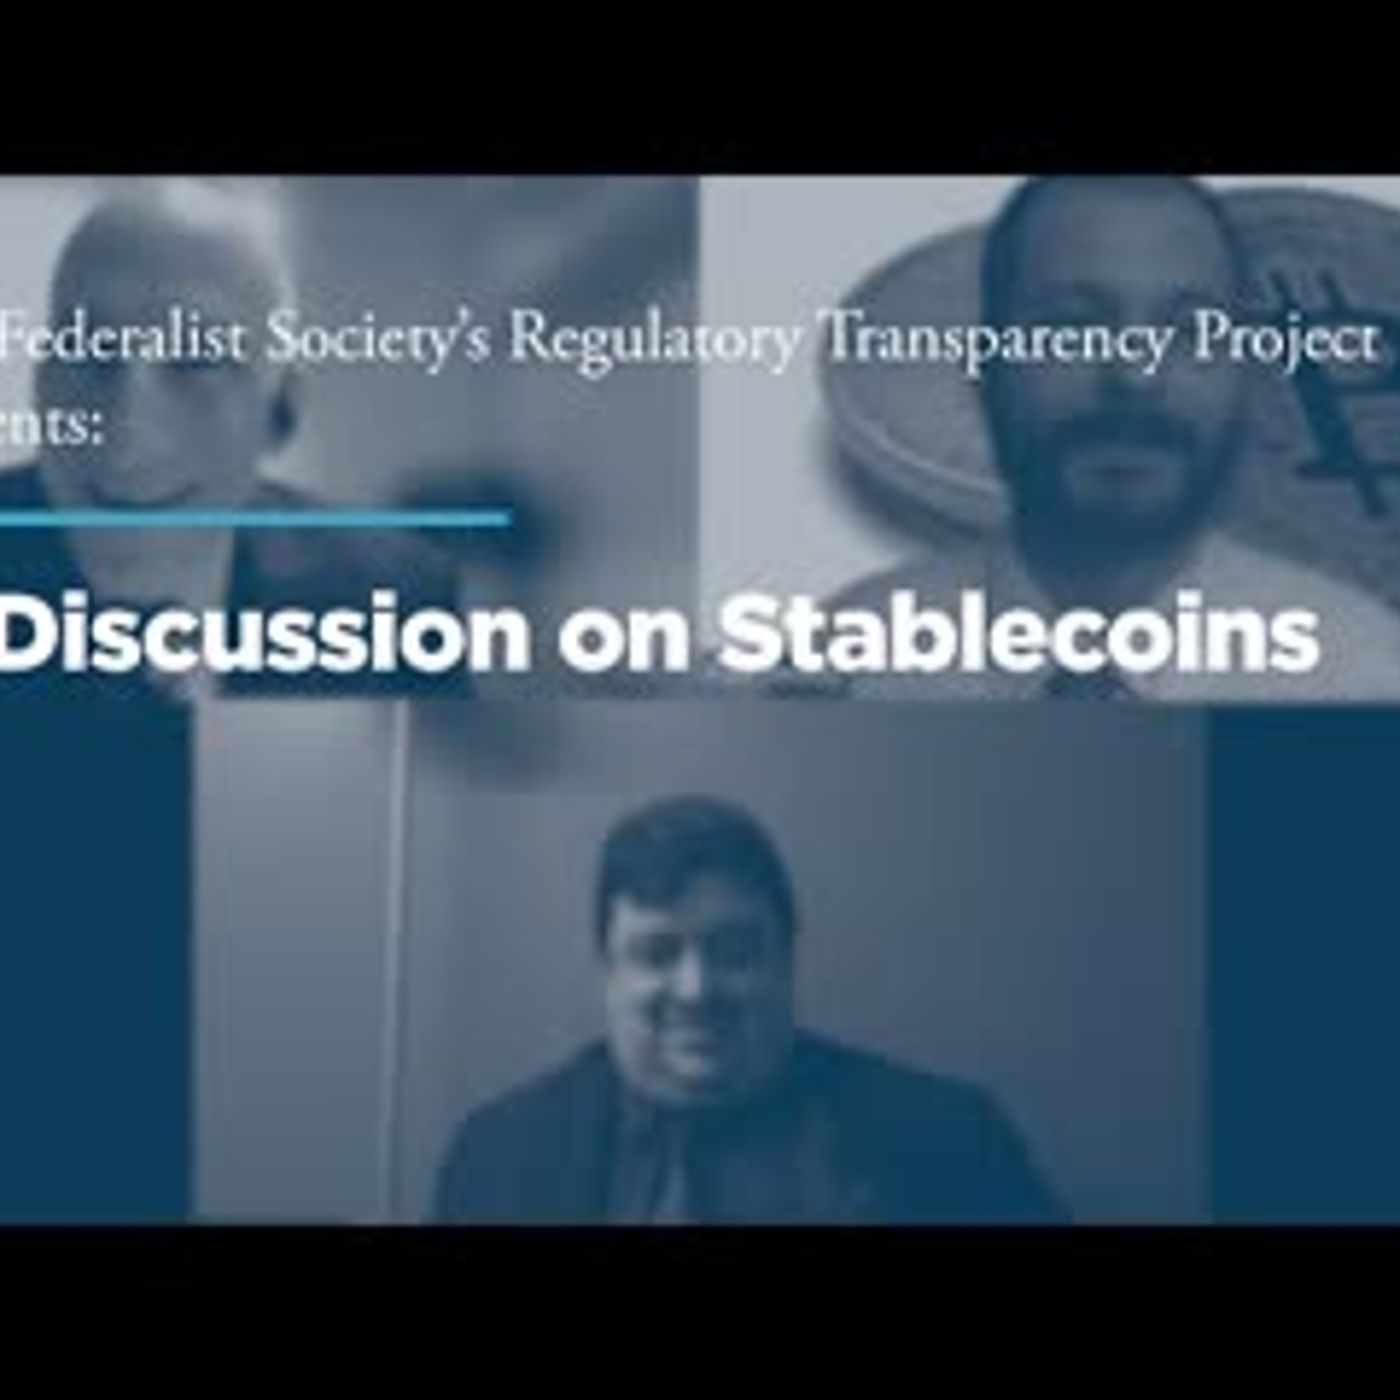 A Discussion on Stablecoins